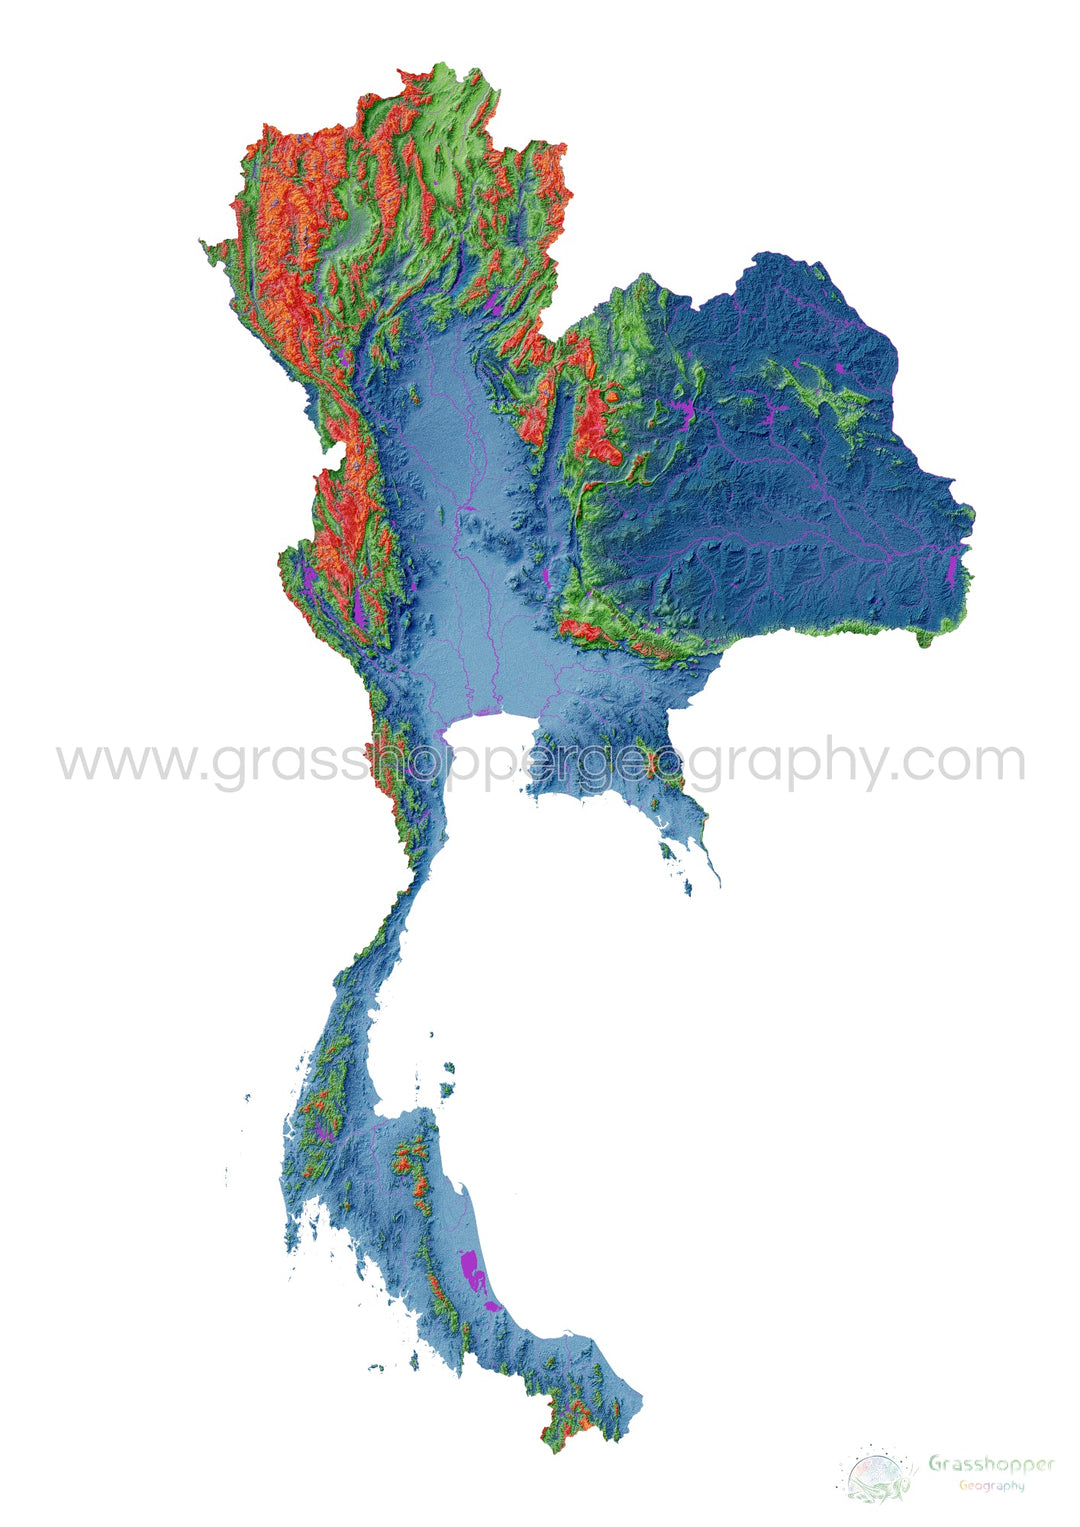 Elevation map of Thailand with white background - Fine Art Print